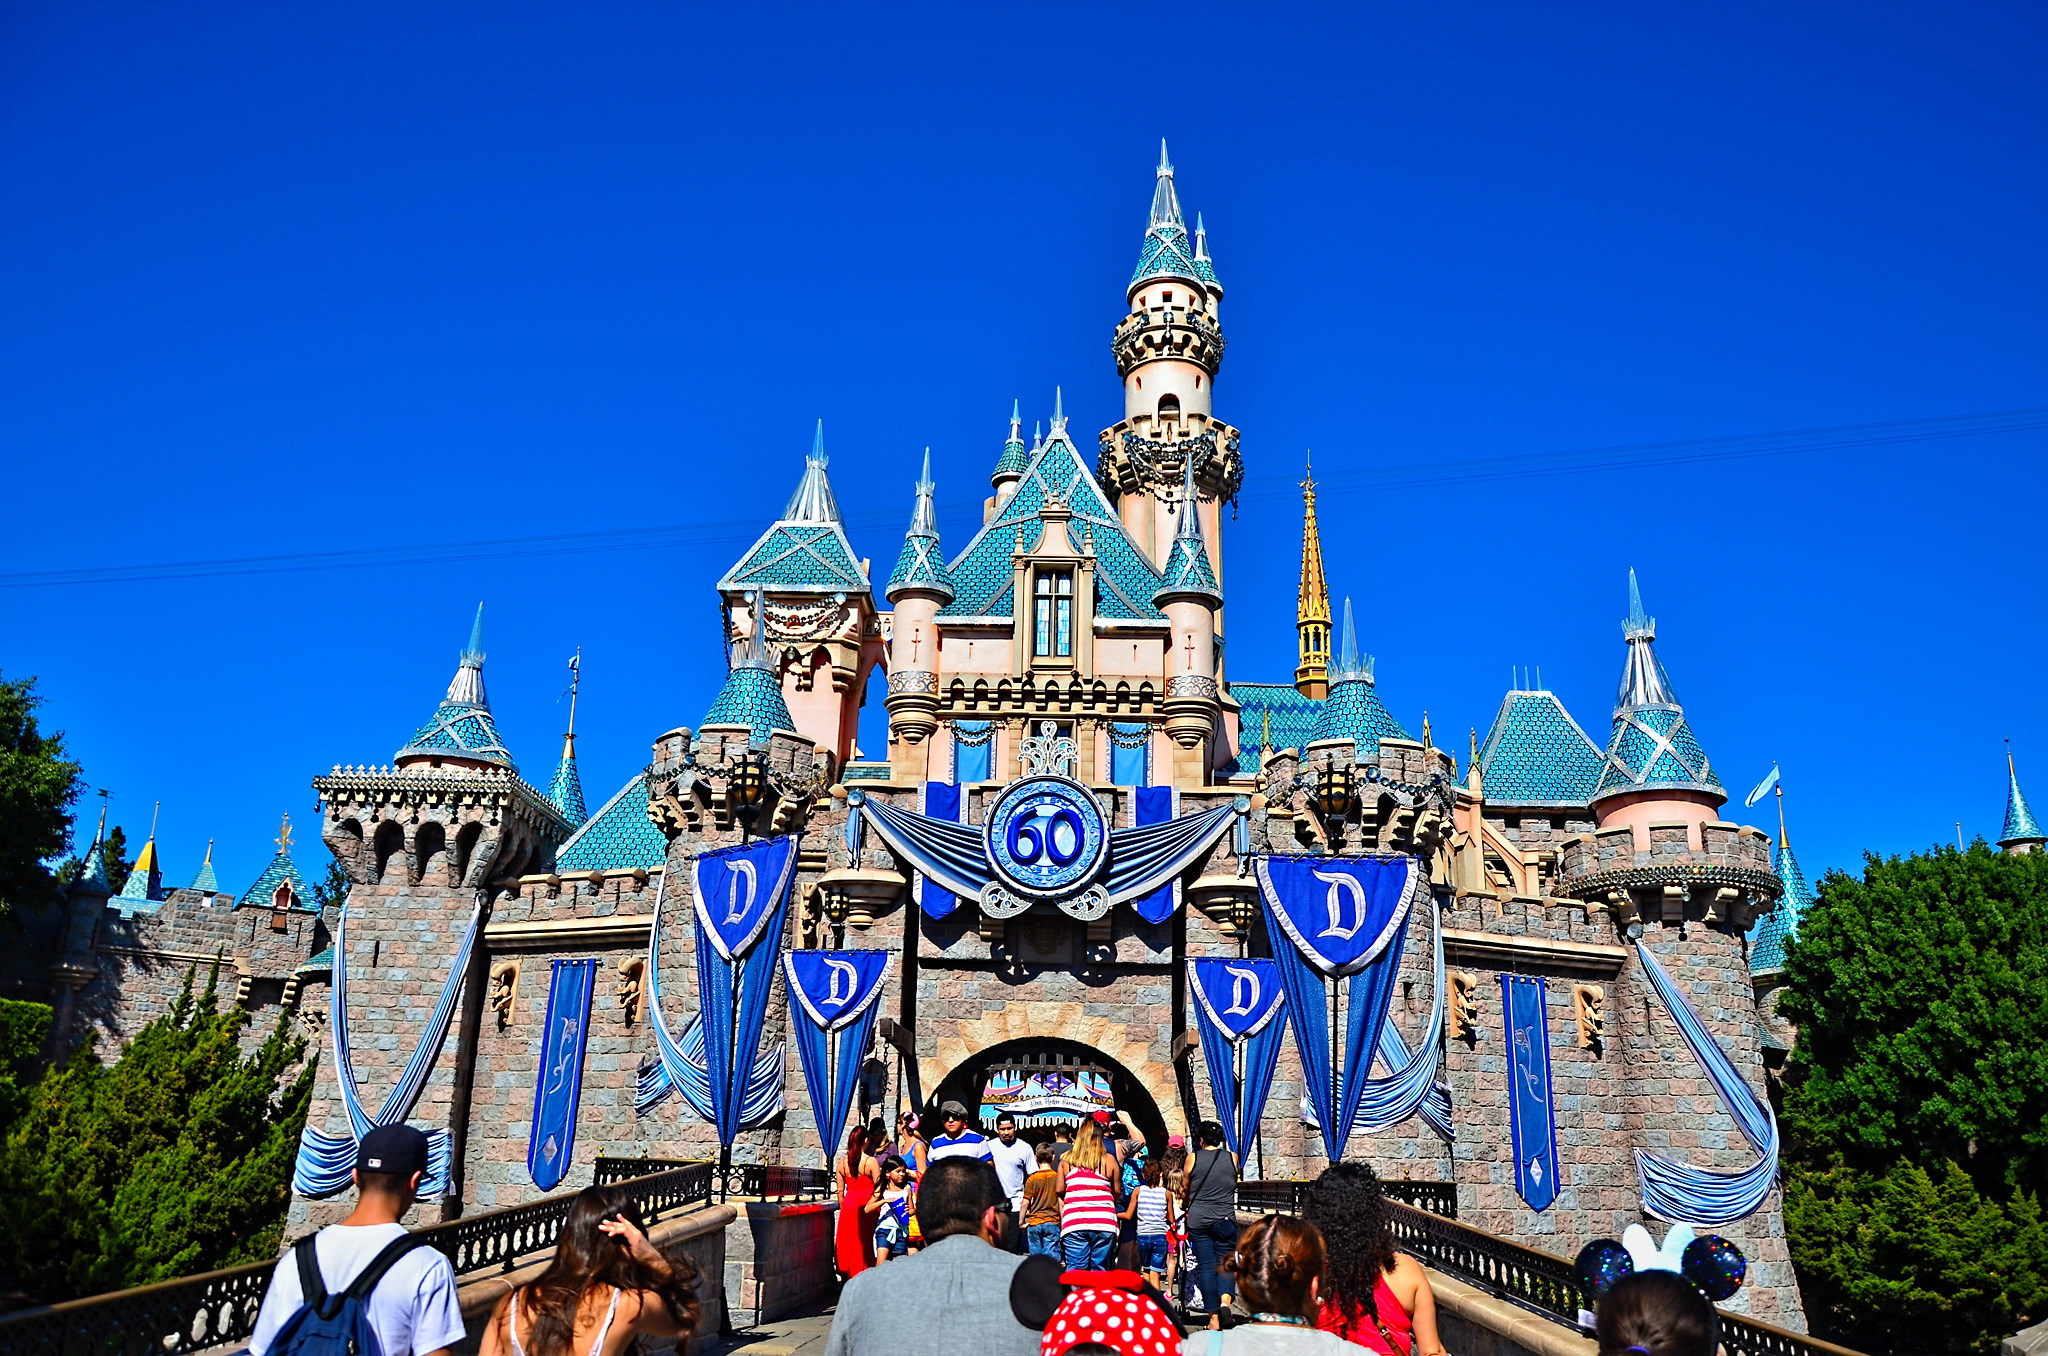 Things to Avoid When You Go to Disneyland in California